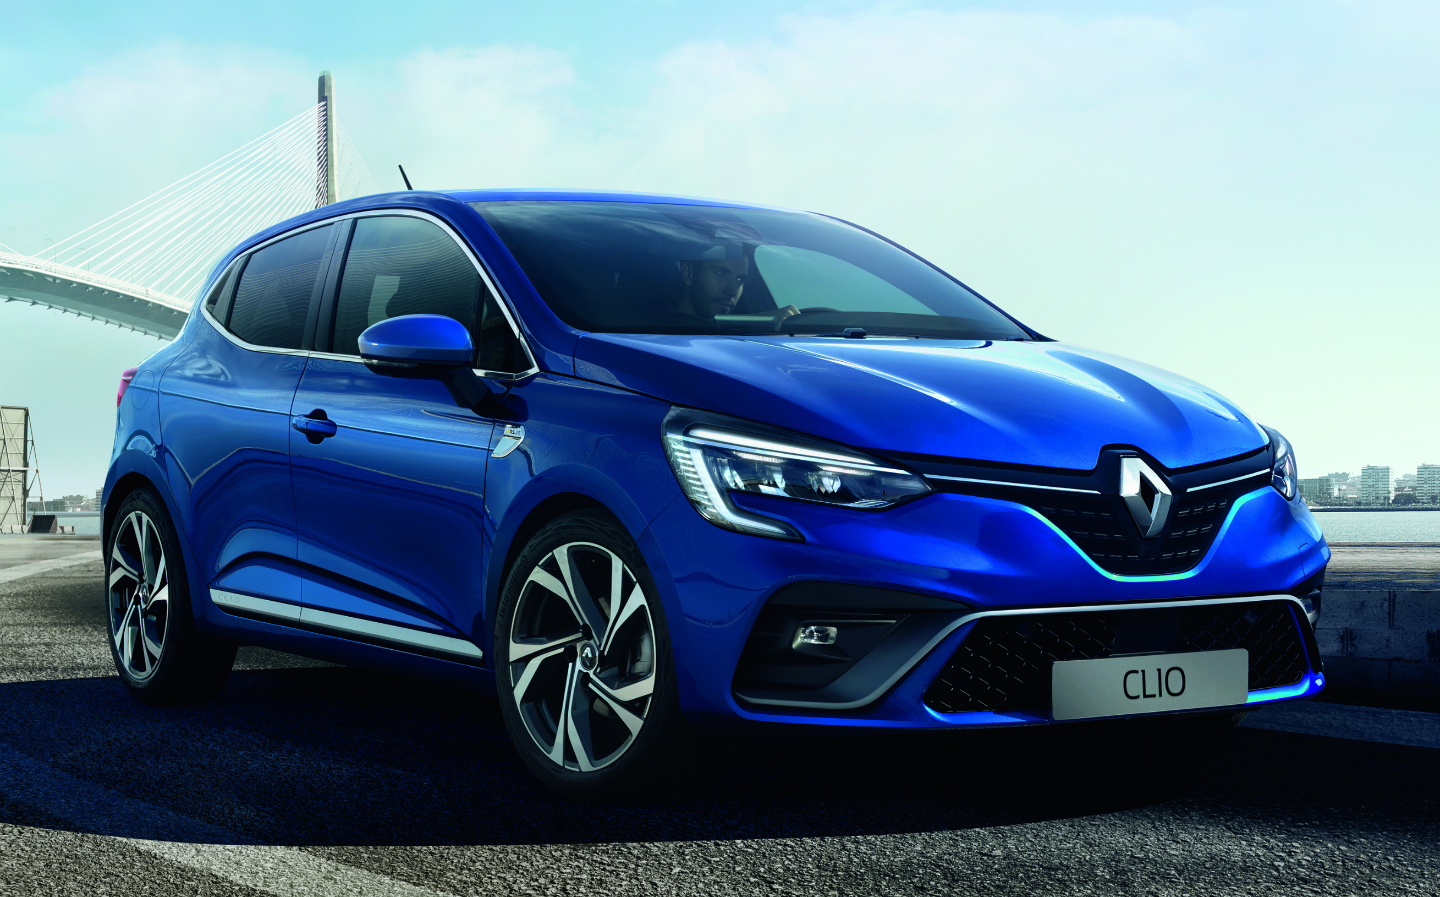 Sunday Times Motor Awards 2019: Best Citycar and Small Car of the Year. Renault Clio